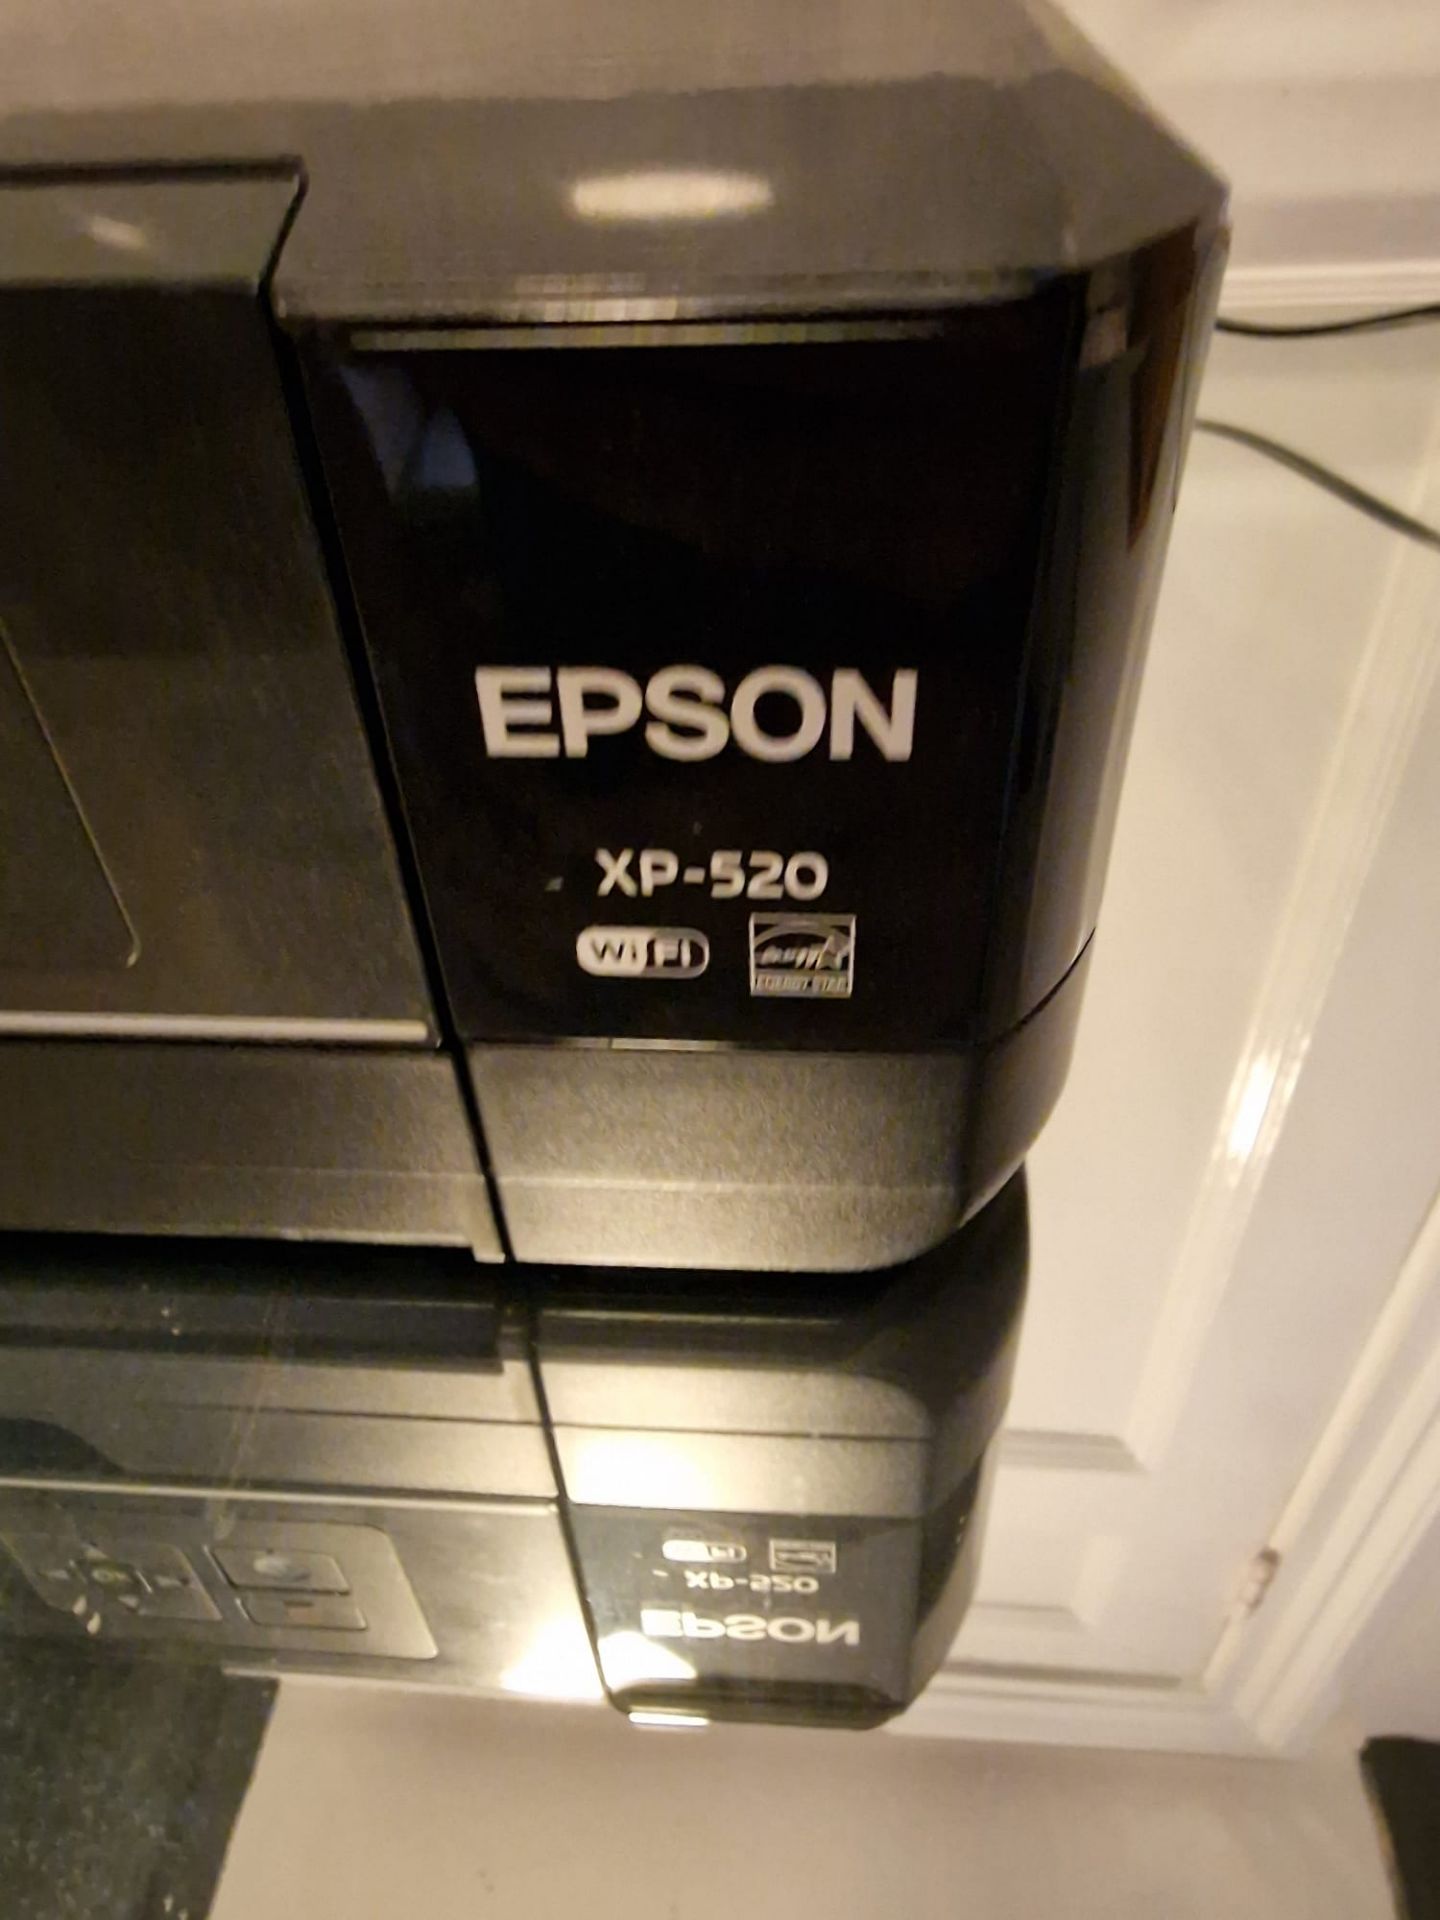 Epson Expression Premium XP-520 Small-in-One All-in-One Printer - Image 2 of 2